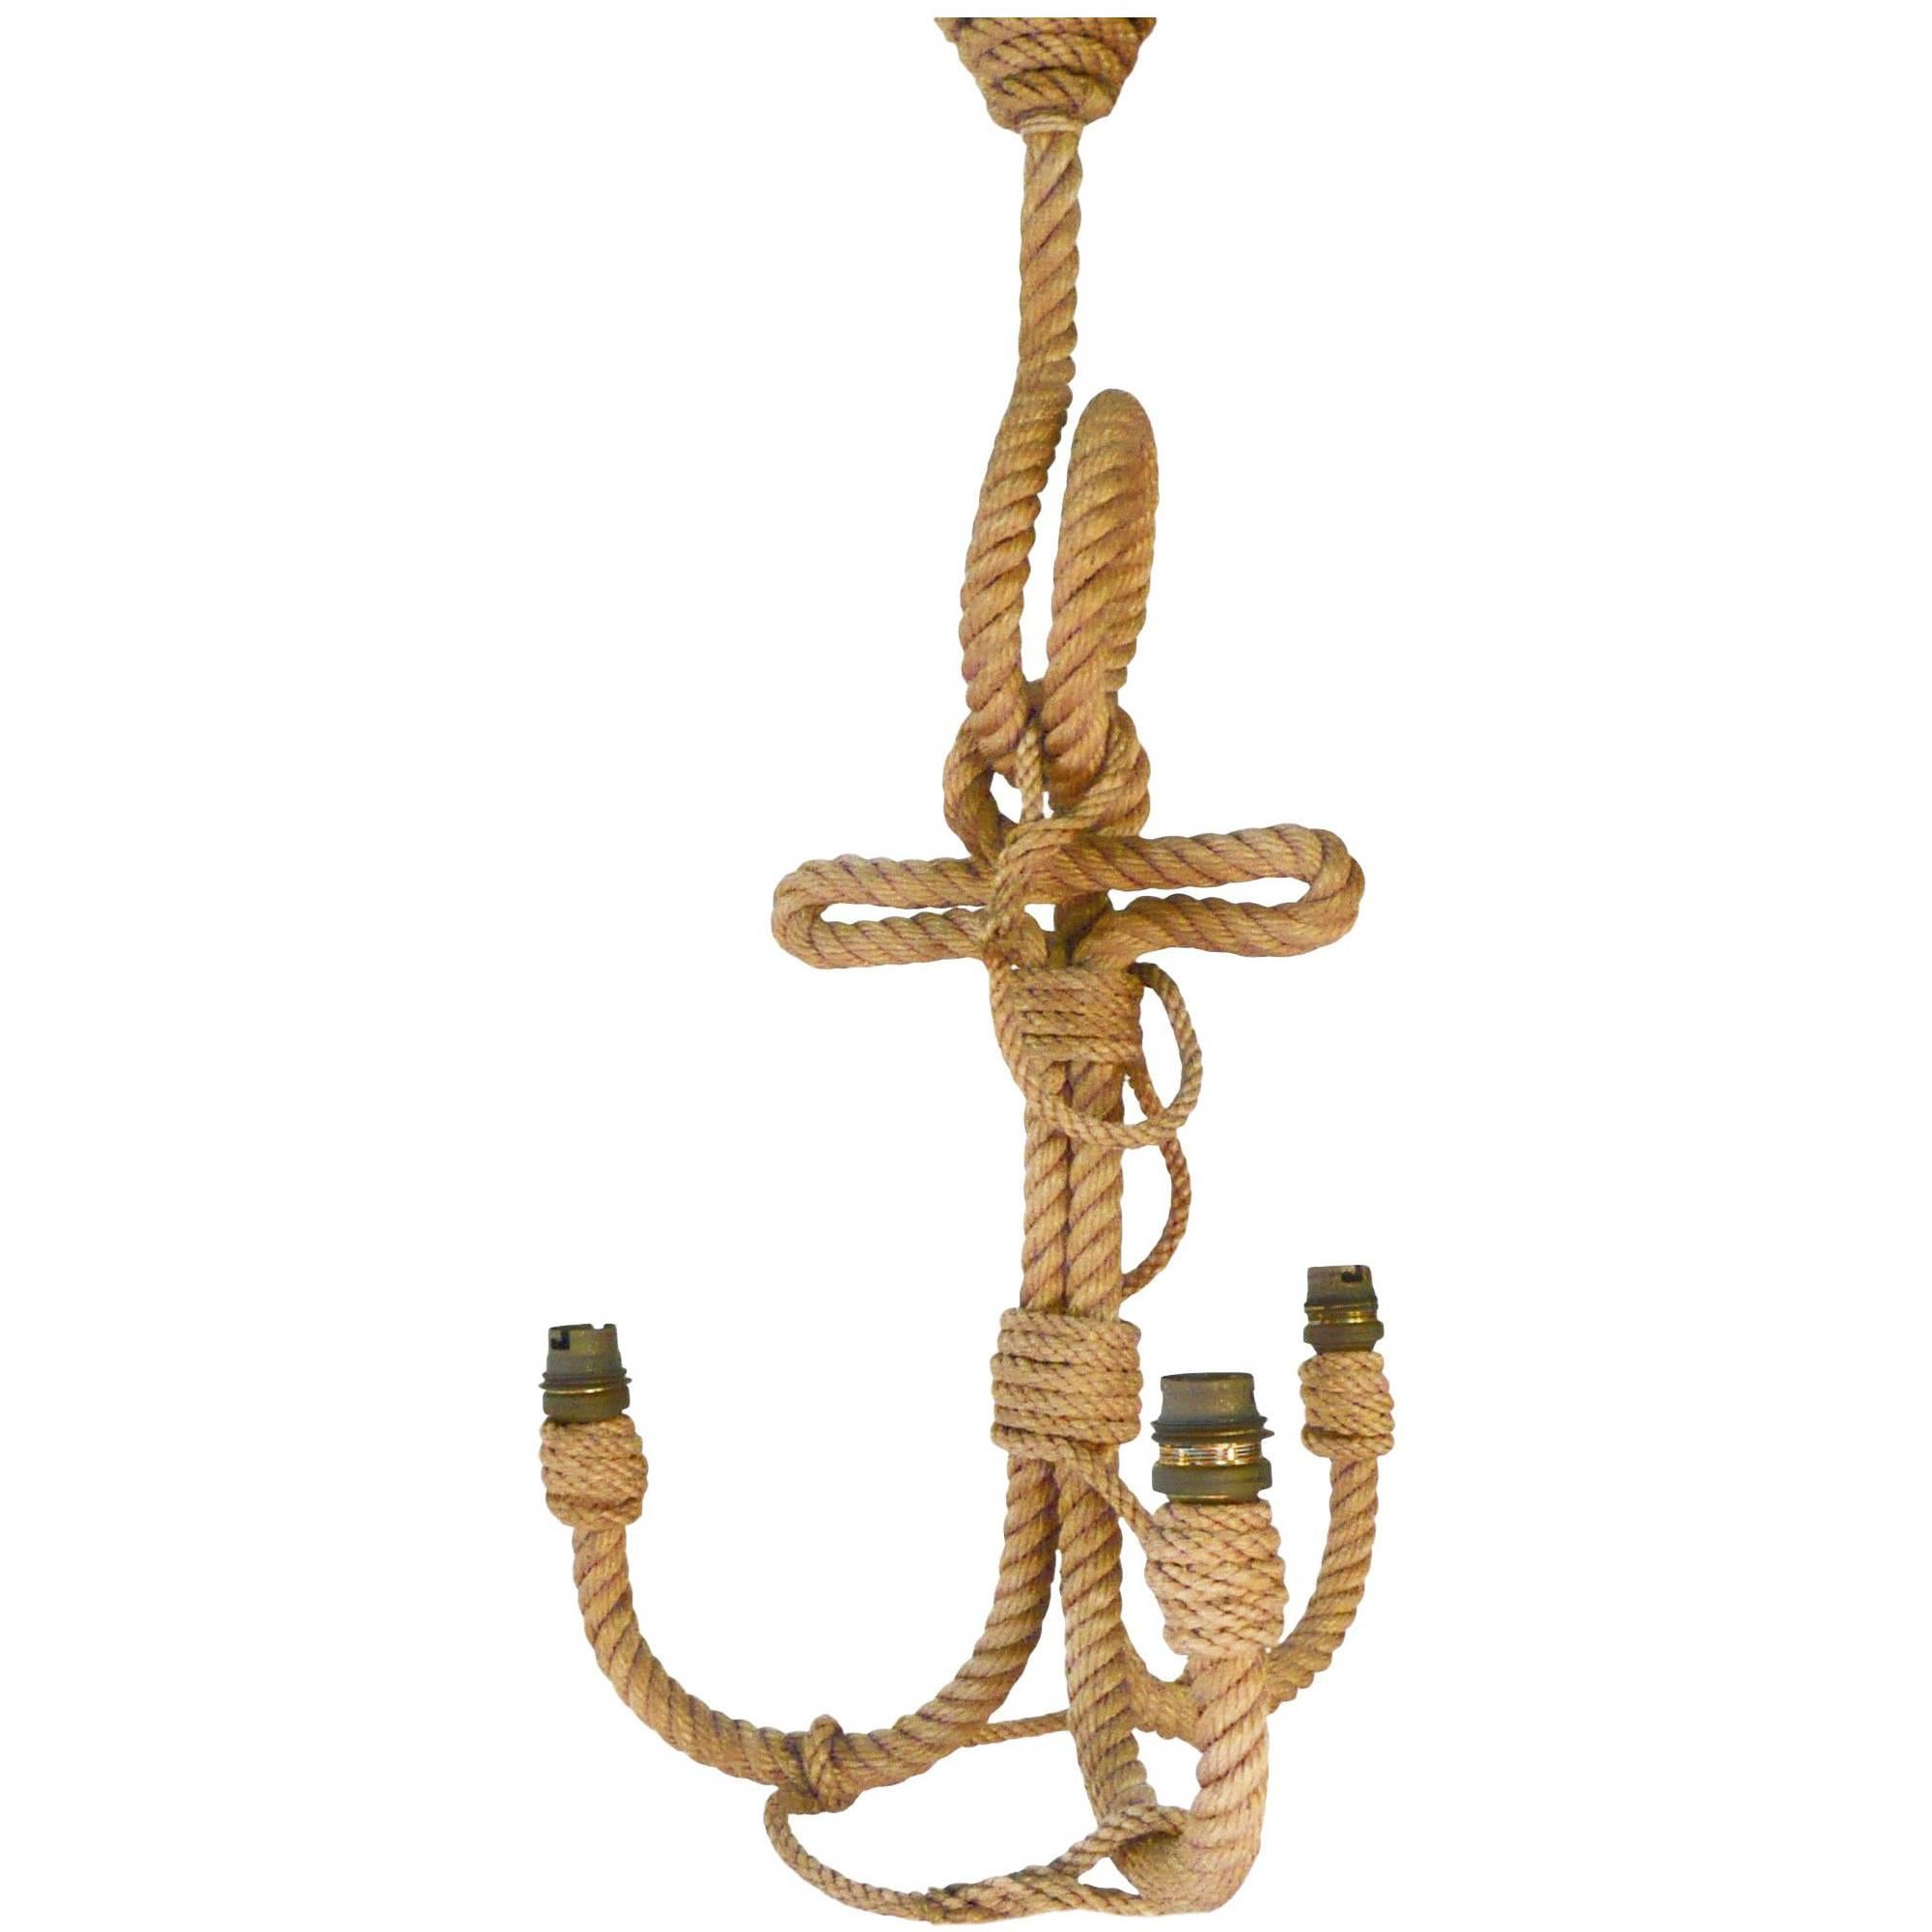 Petite Marine Theme Anchor Shaped Chandelier by Audoux Minet, France, 1960s